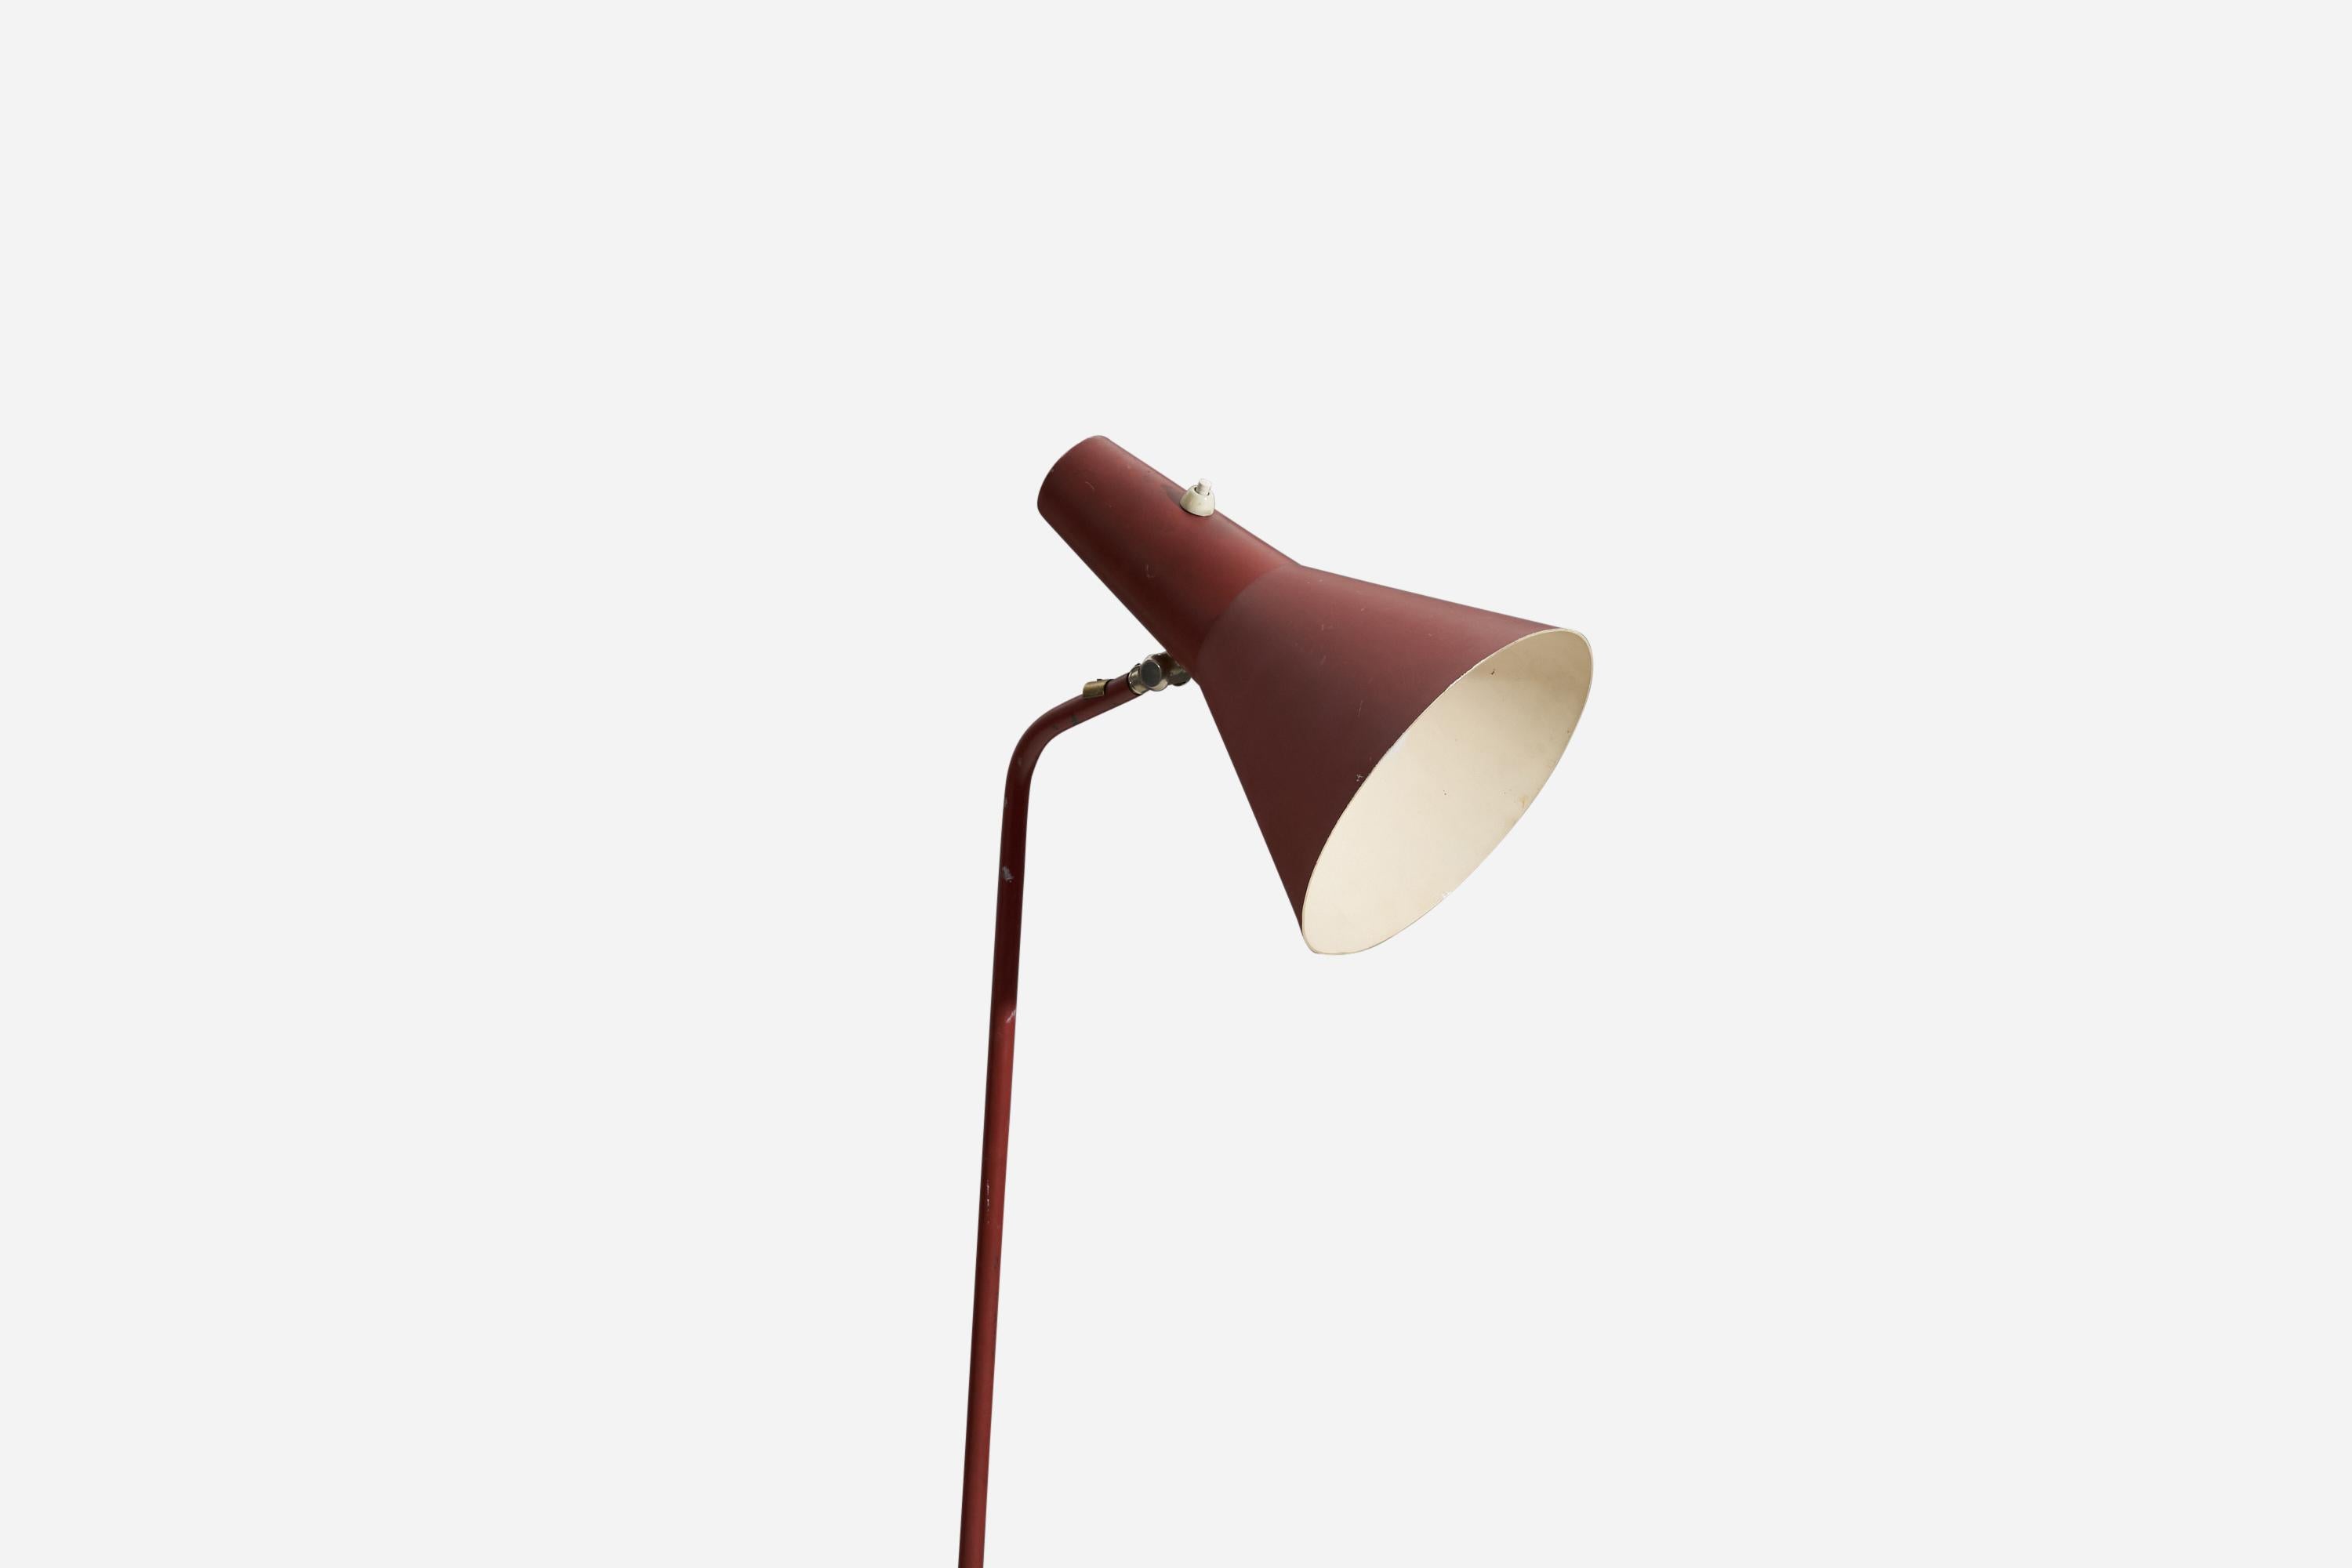 Mid-Century Modern Svend Aage Holm Sørensen, Floor Lamp, Red Lacquer Metal, Brass ASEA Sweden 1950s For Sale